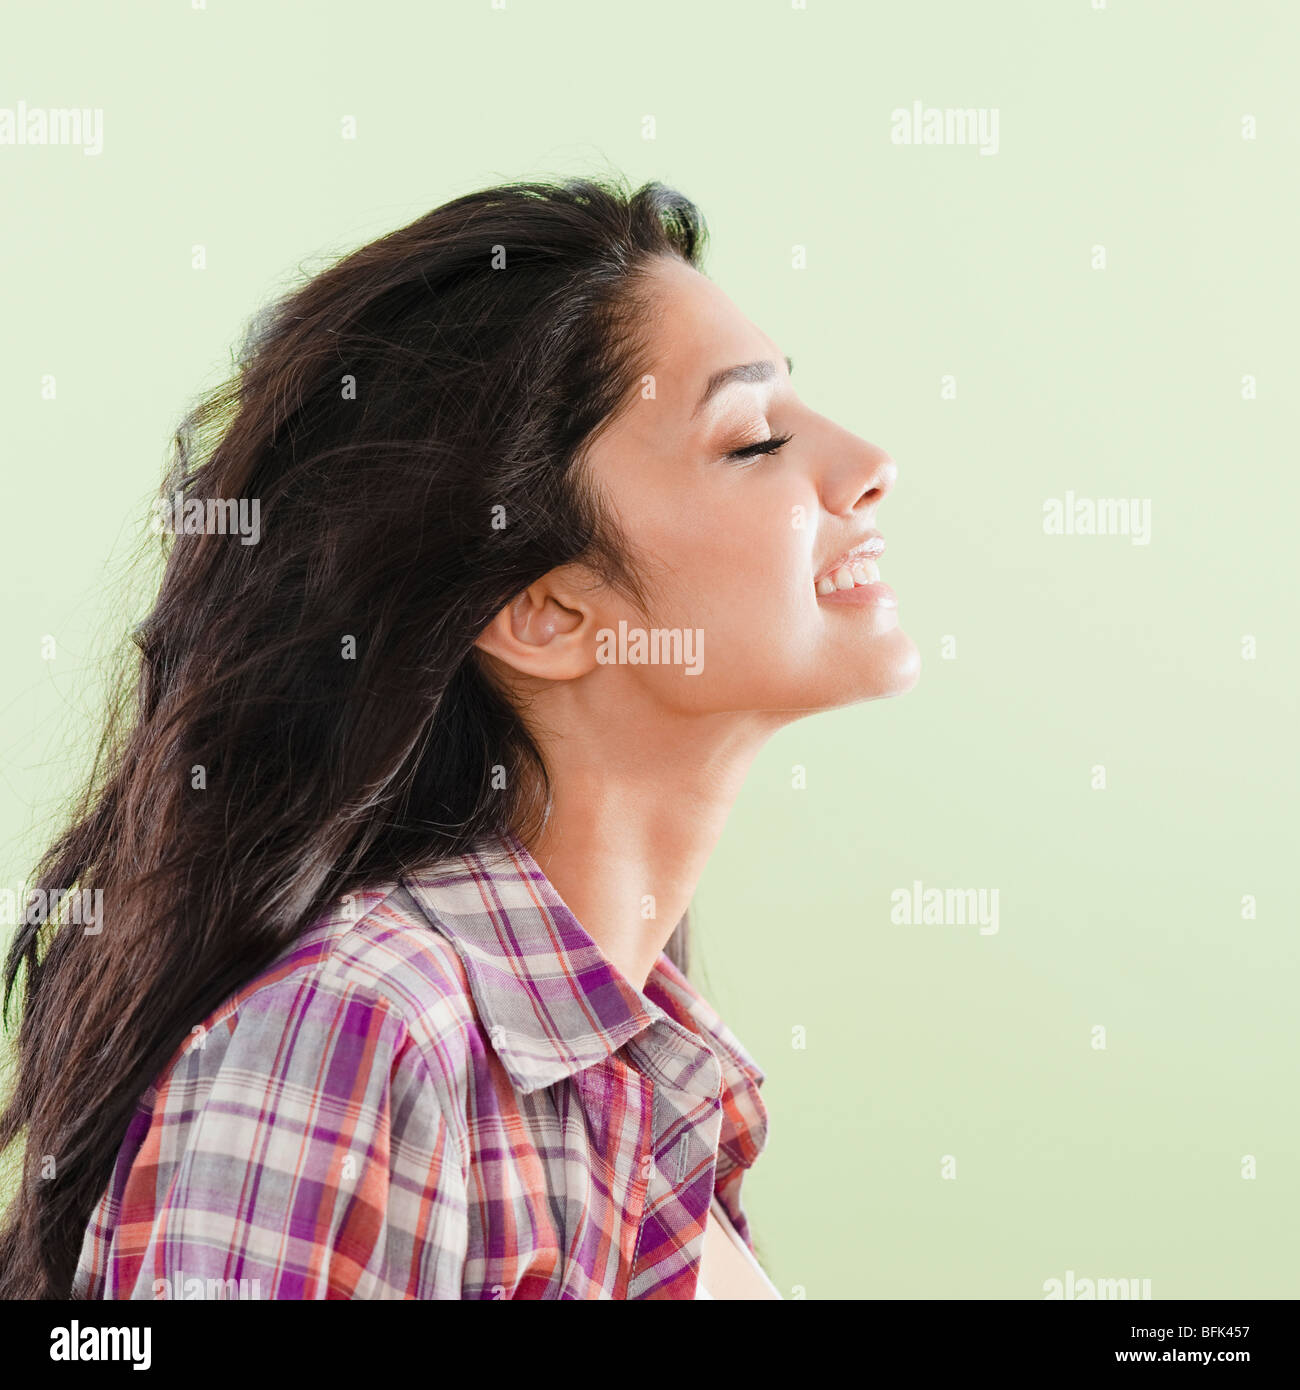 Profile of Middle Eastern woman Stock Photo